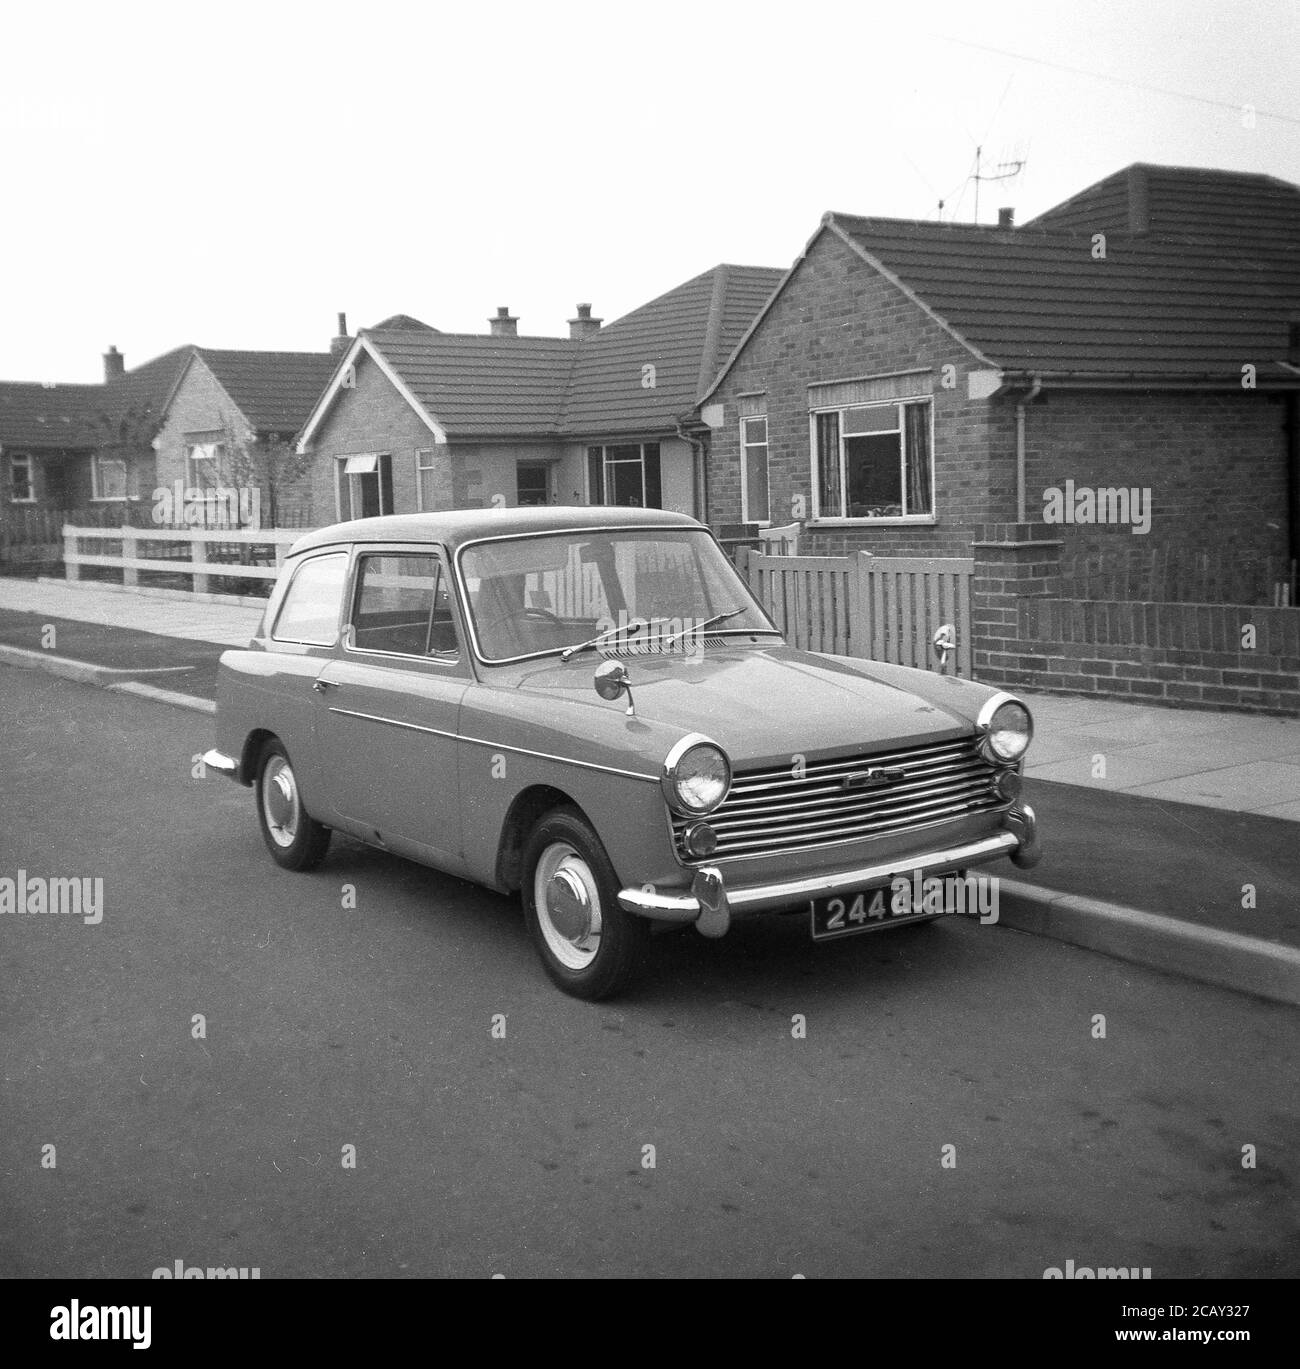 1960, historical, An Austin A40 Farina motorcar parked in a street of bungalows,  England, UK. A small, economy car, made by the British Motor Coporation (BMC) it was named the Austin A40 Farina, reflecting the new design by the Italian 'Battista Farina's Pinin Farina Turin studio.  The car shown here is the Mark 1 Saloon, made between 1958 and 1961. Stock Photo